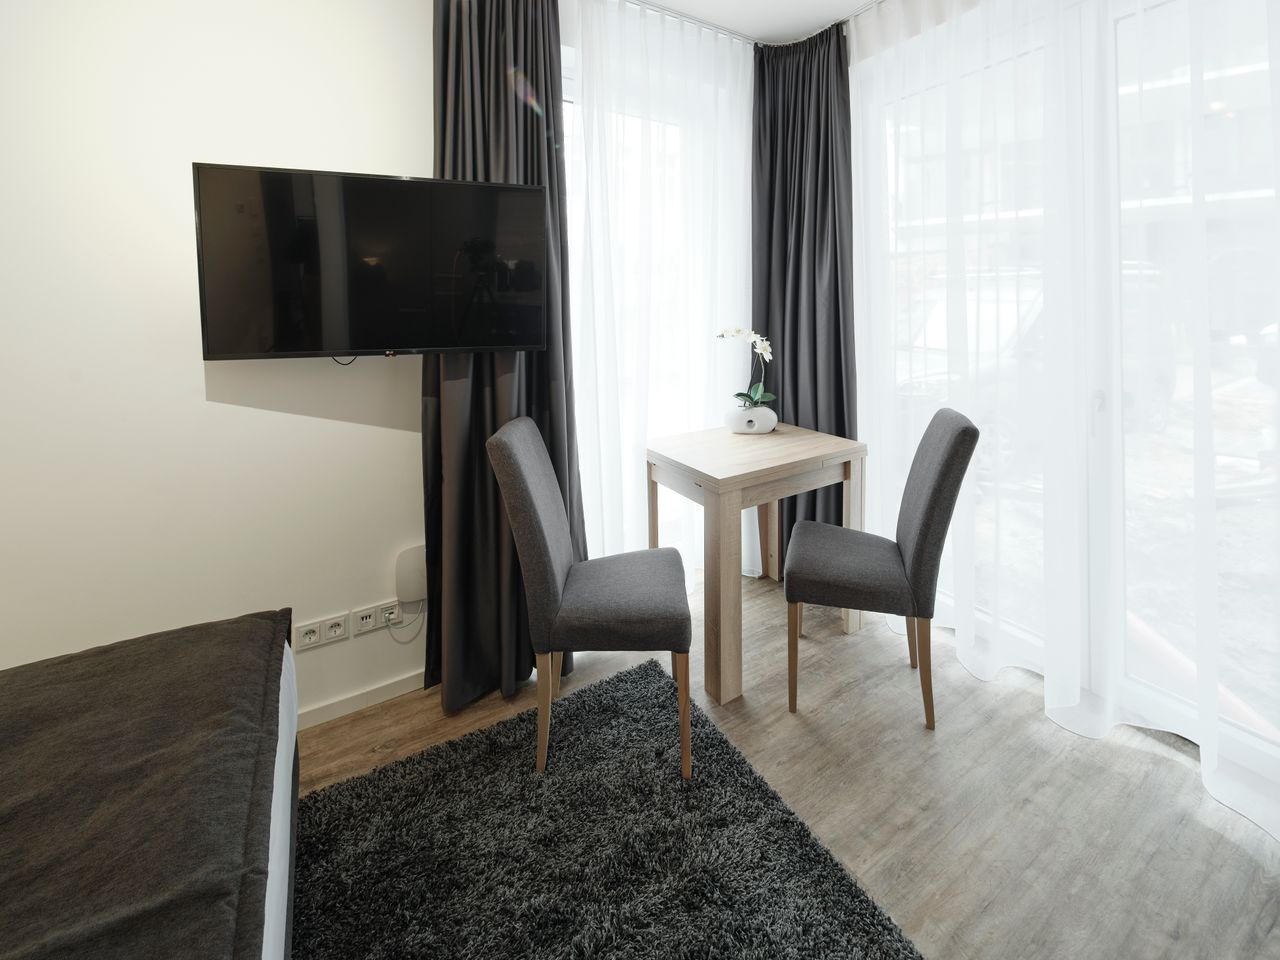 New suite located in Mitte